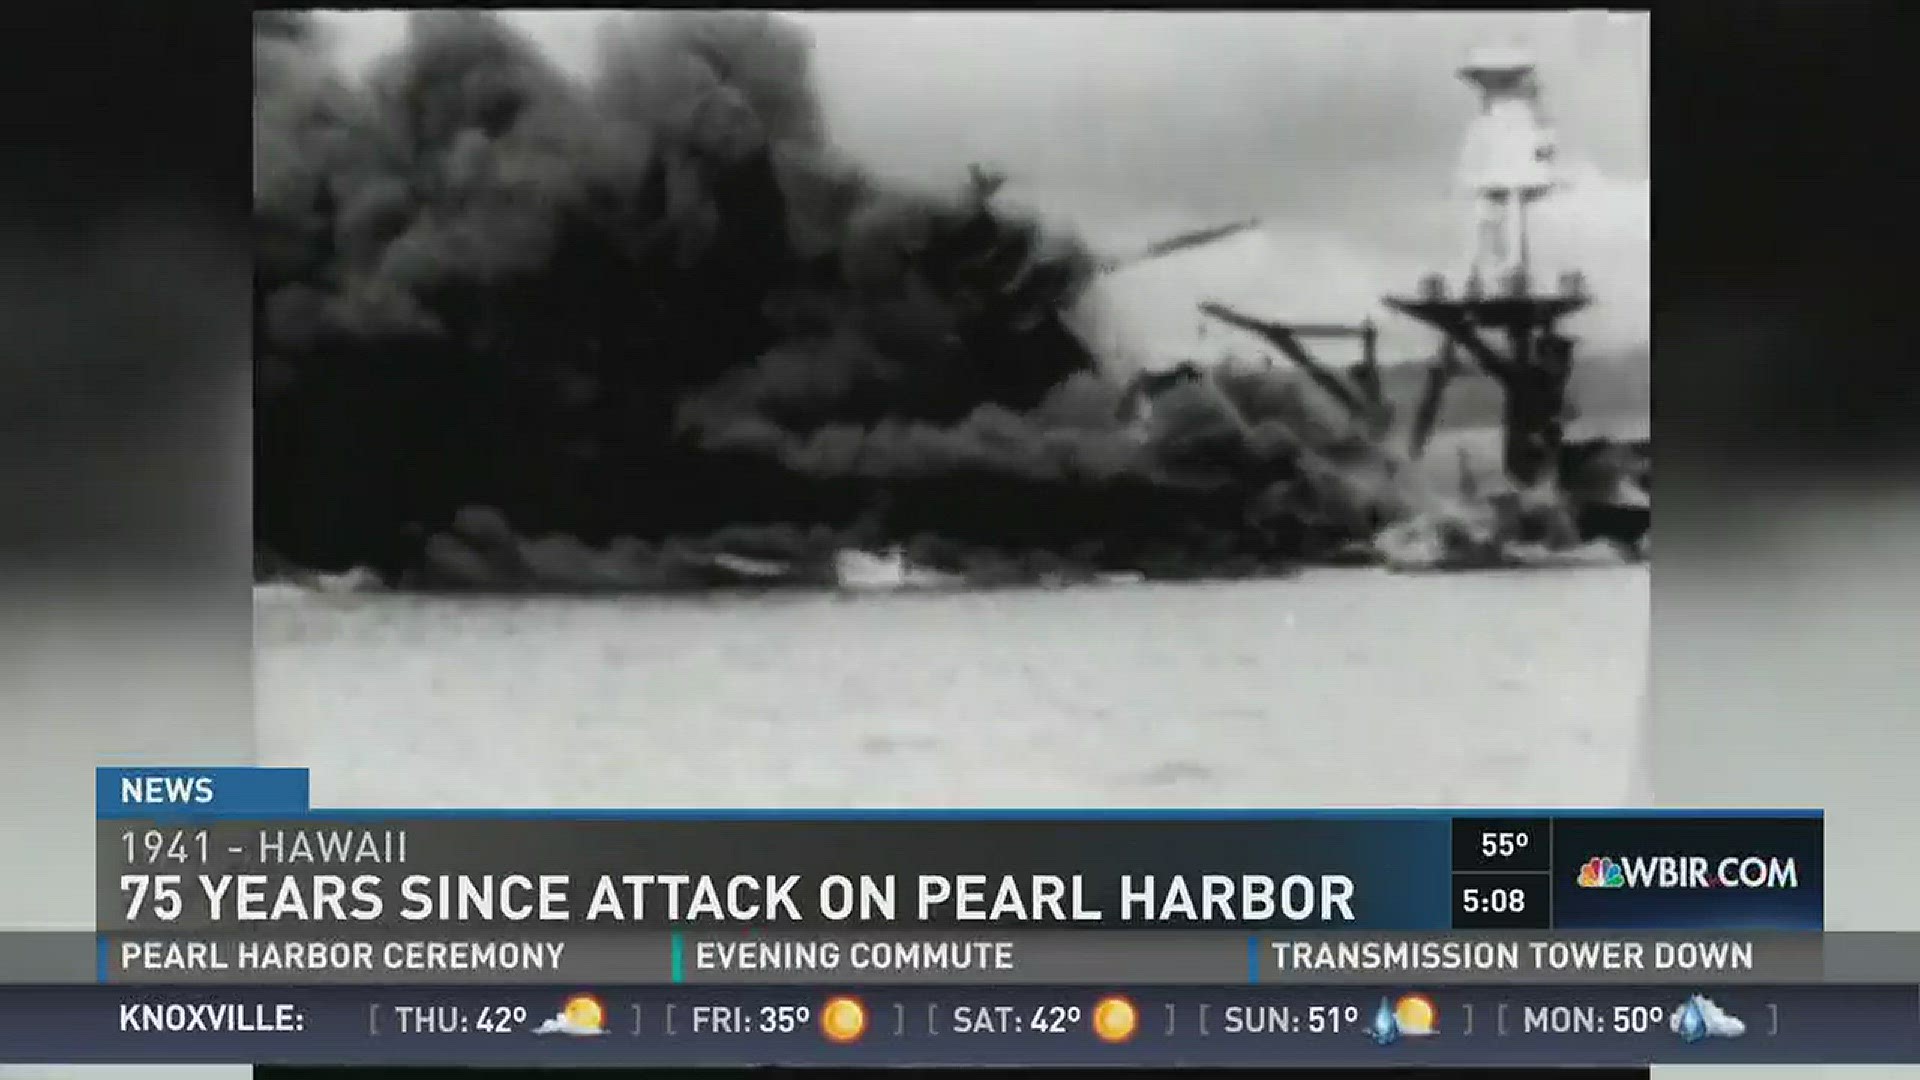 Veterans say no one should ever forget what happened in Hawaii on Dec. 7, 1941.